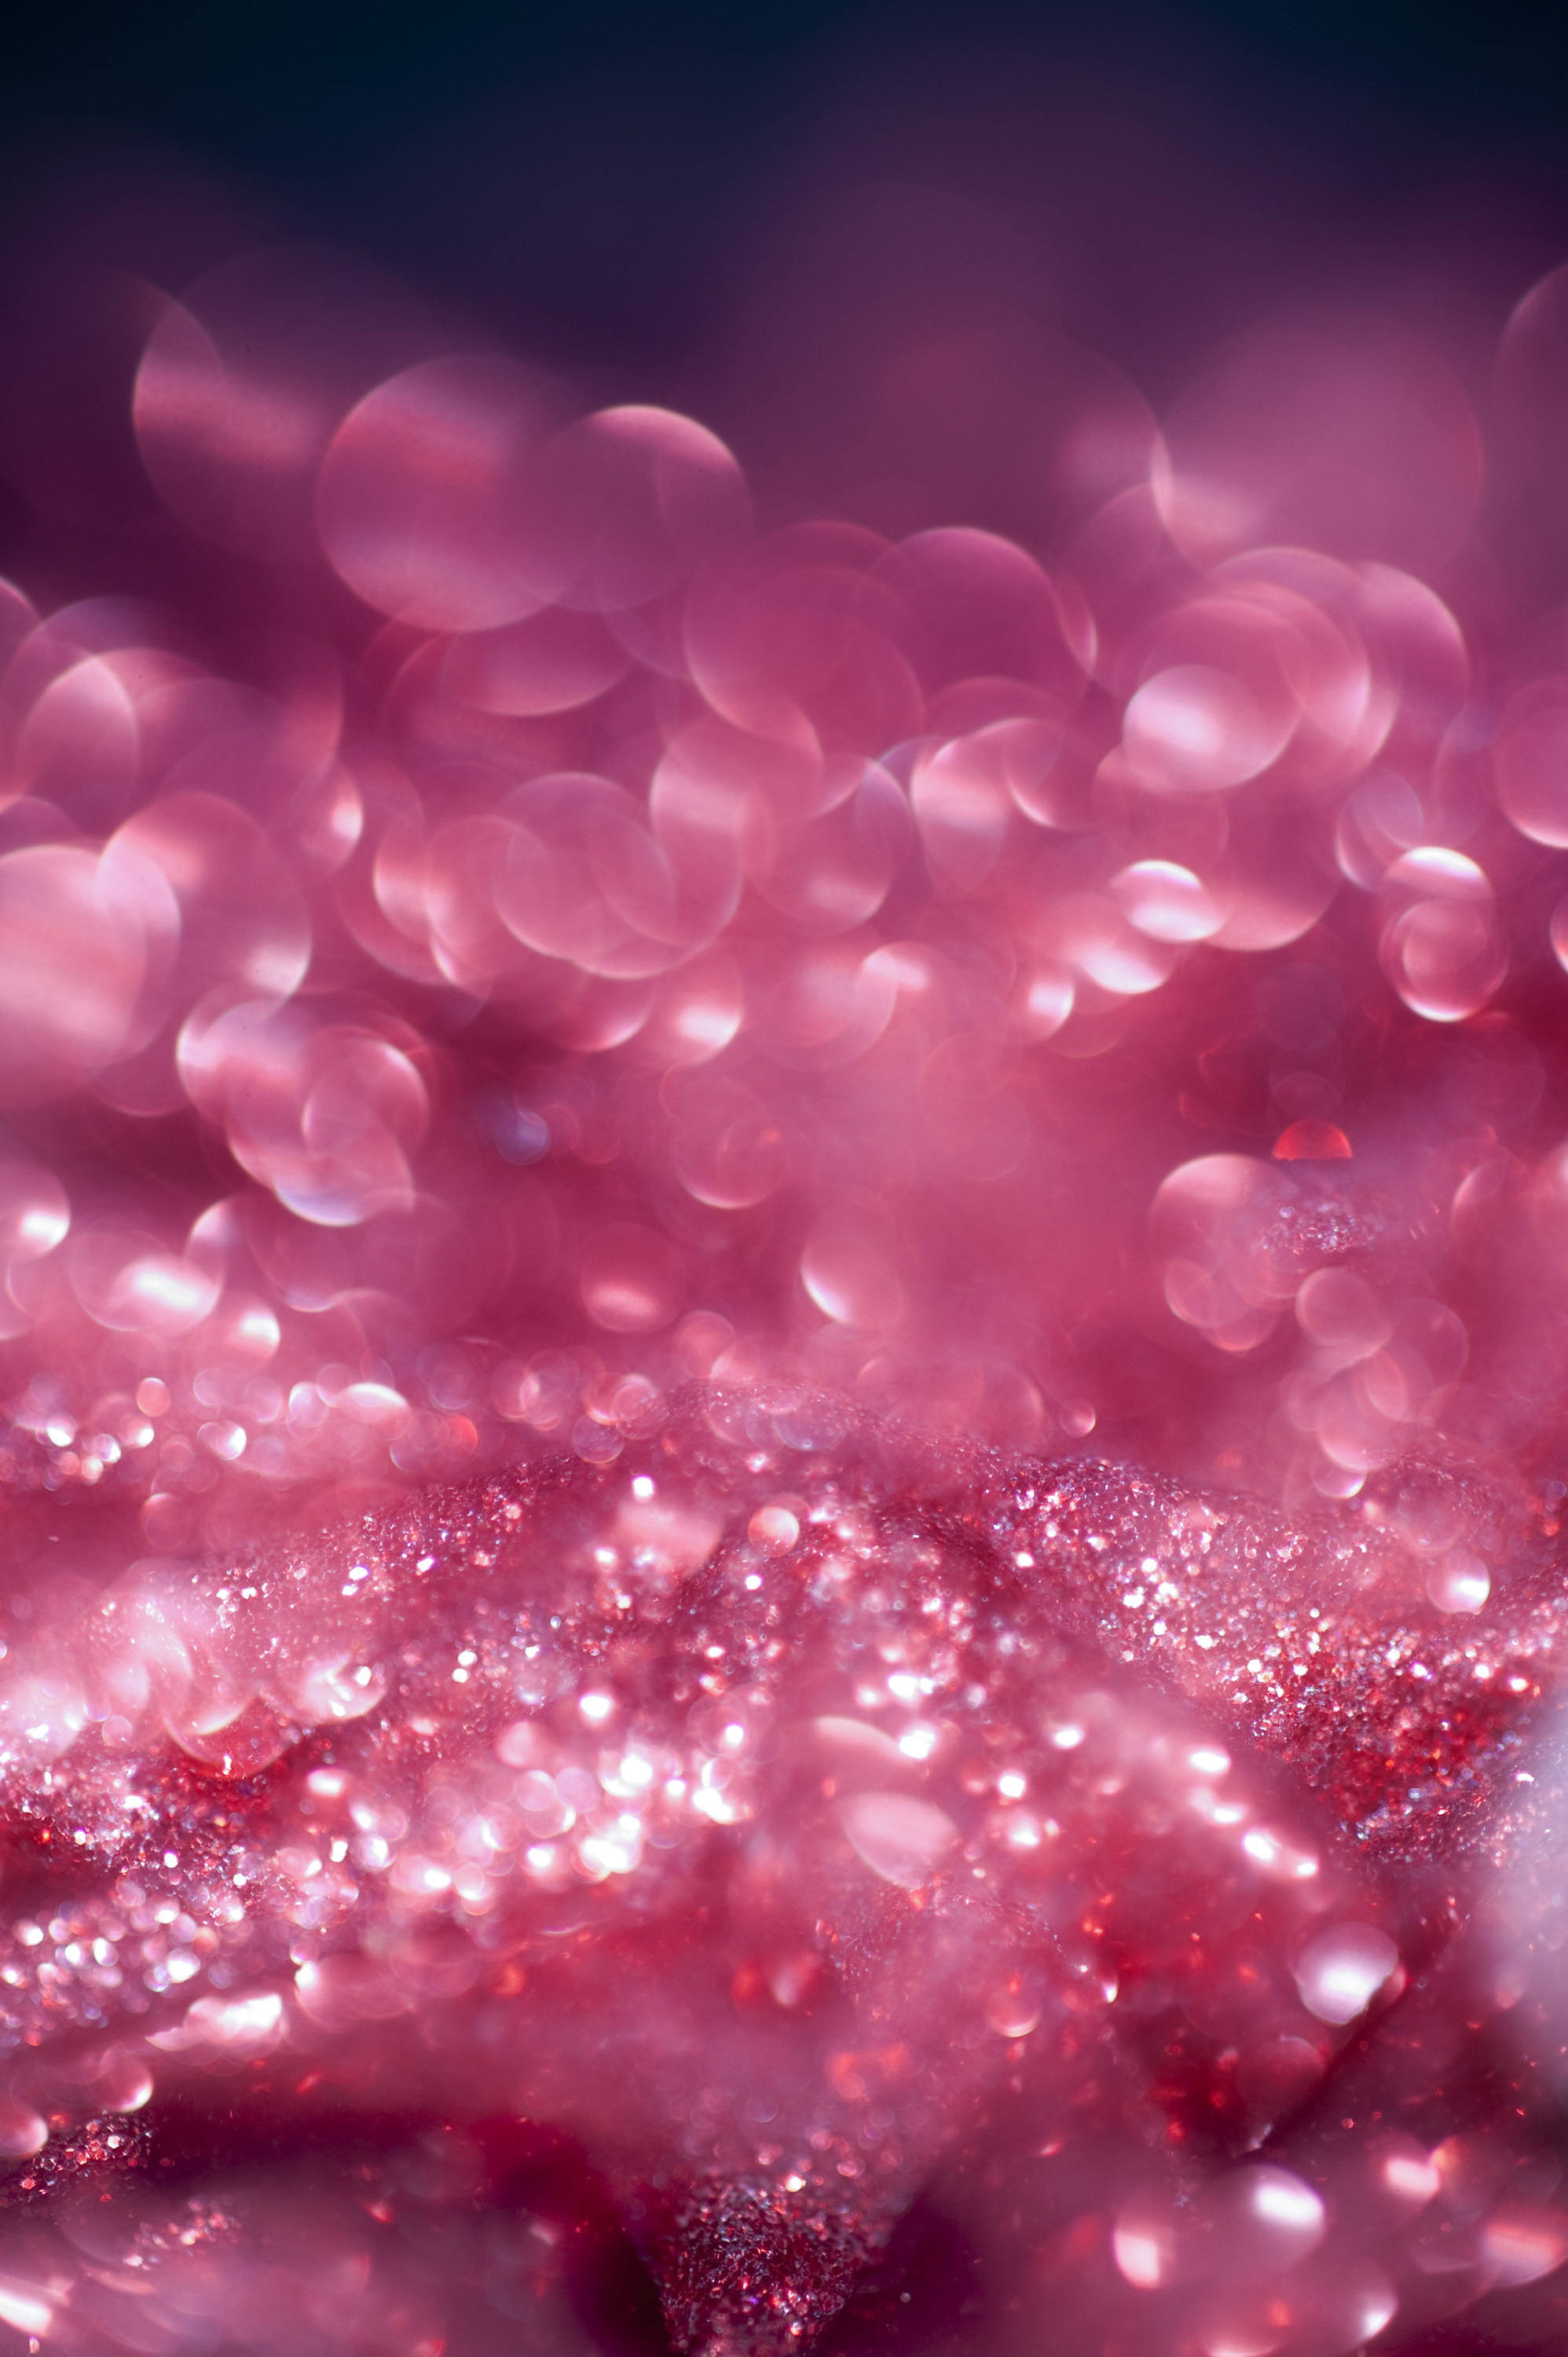 1996x3000 elegant free stock photo pink glitter with pink bling wallpaper